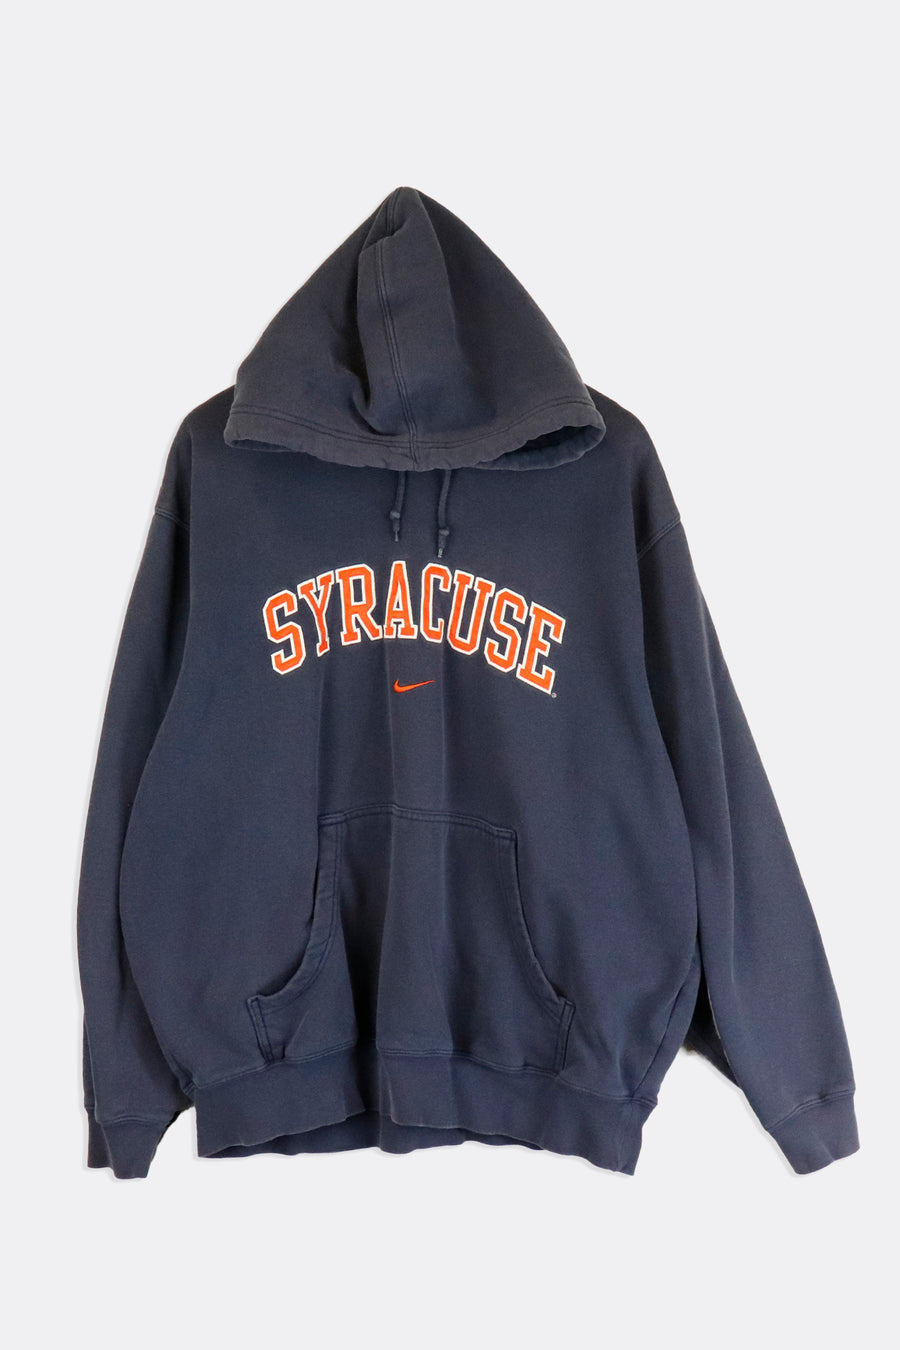 Vintage Nike Syracuse Embroidered Orange Font Outlined In White With Nike Logo Hooded Sweatshirt Sz L